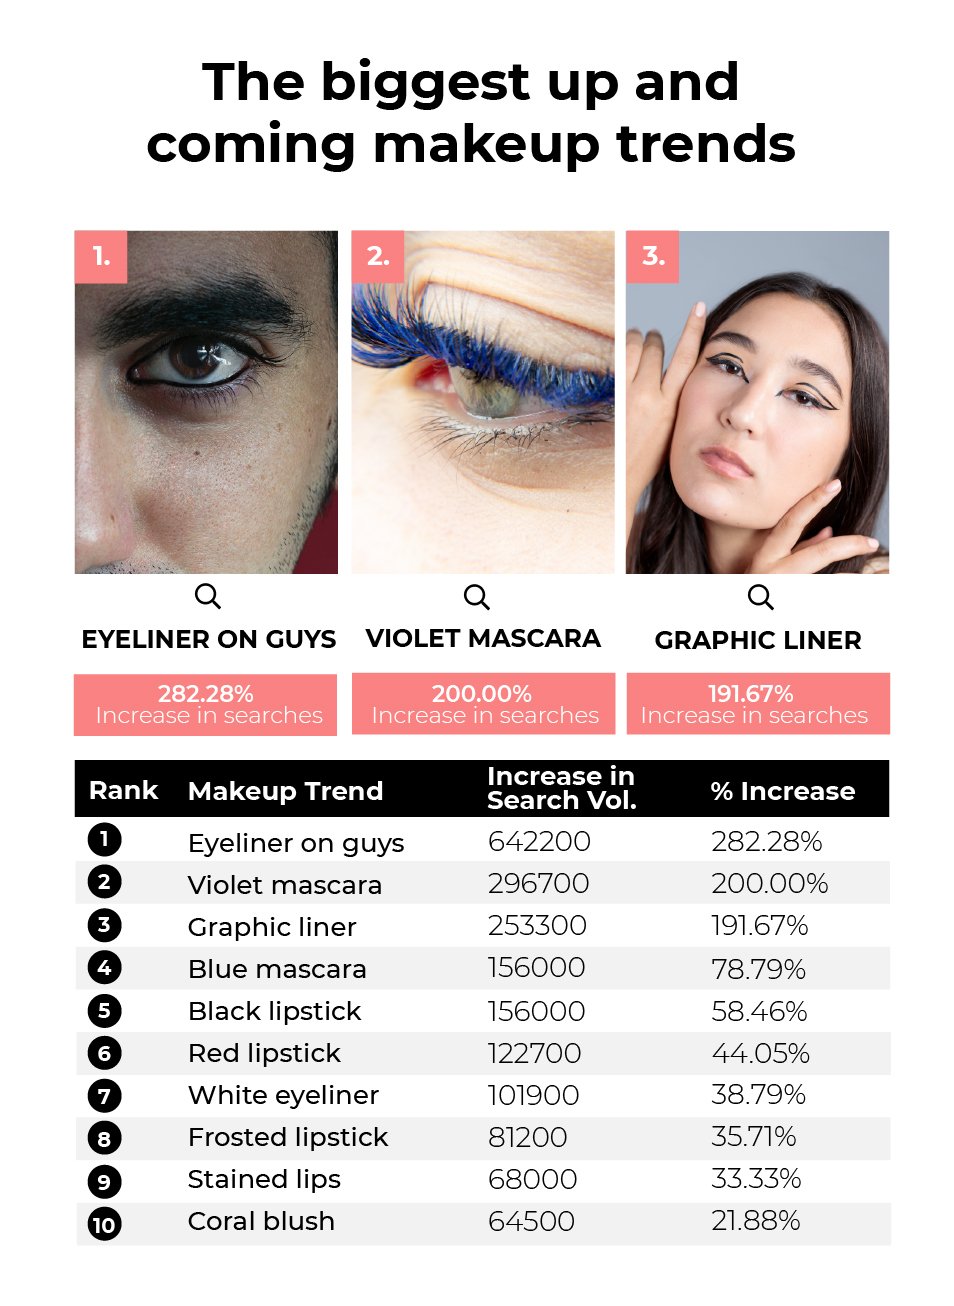 The biggest up and coming makeup trends: Eyeliner on guys (282.28% increase in searches), Violet Mascara (200% increase in searches) and Graphic Liner (191.67% increase in searches)